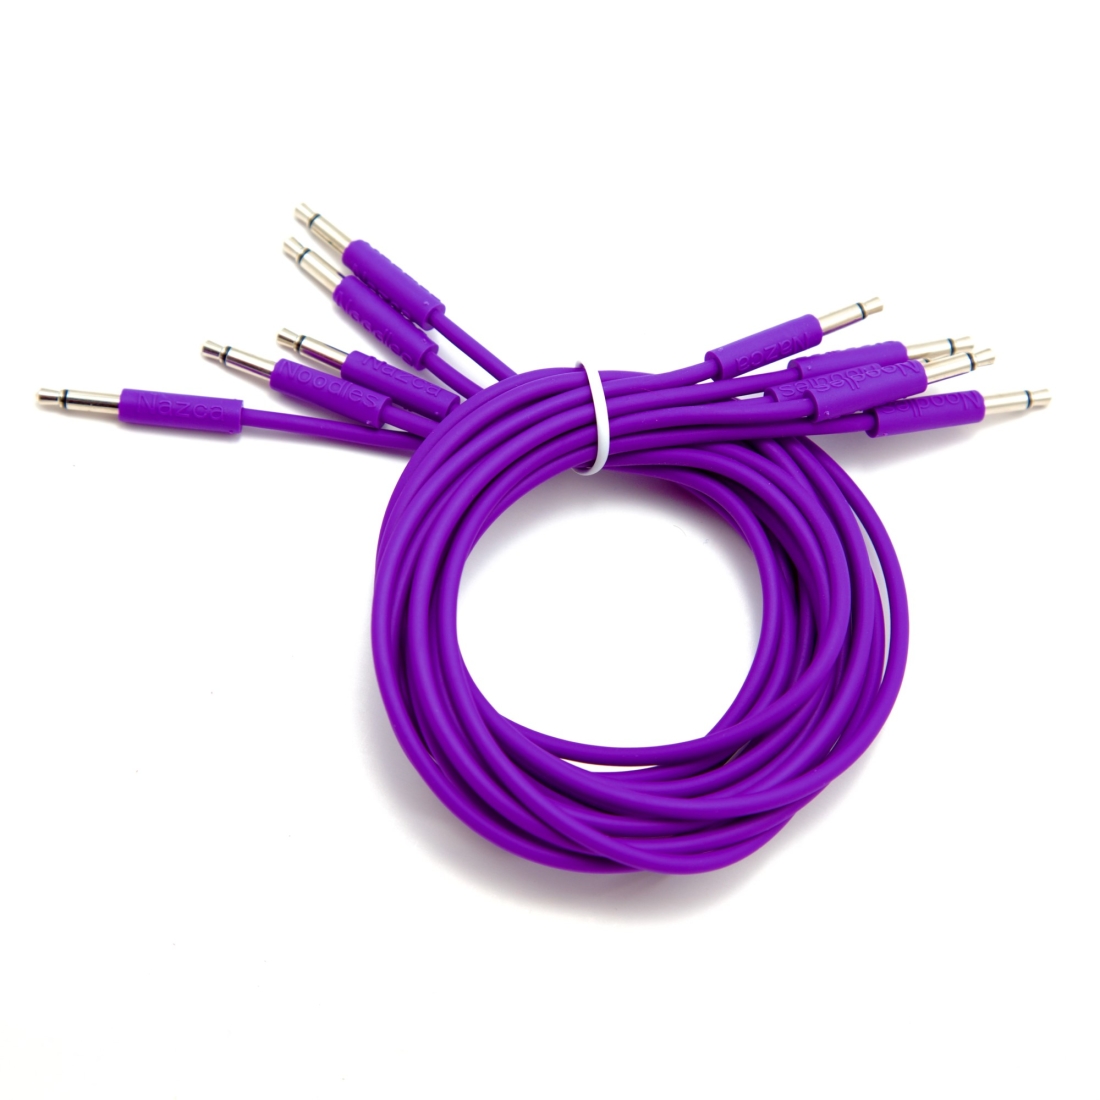 Patch Cables 3.5mm TS to 3.5mm TS - 150cm - Violet (5-Pack)